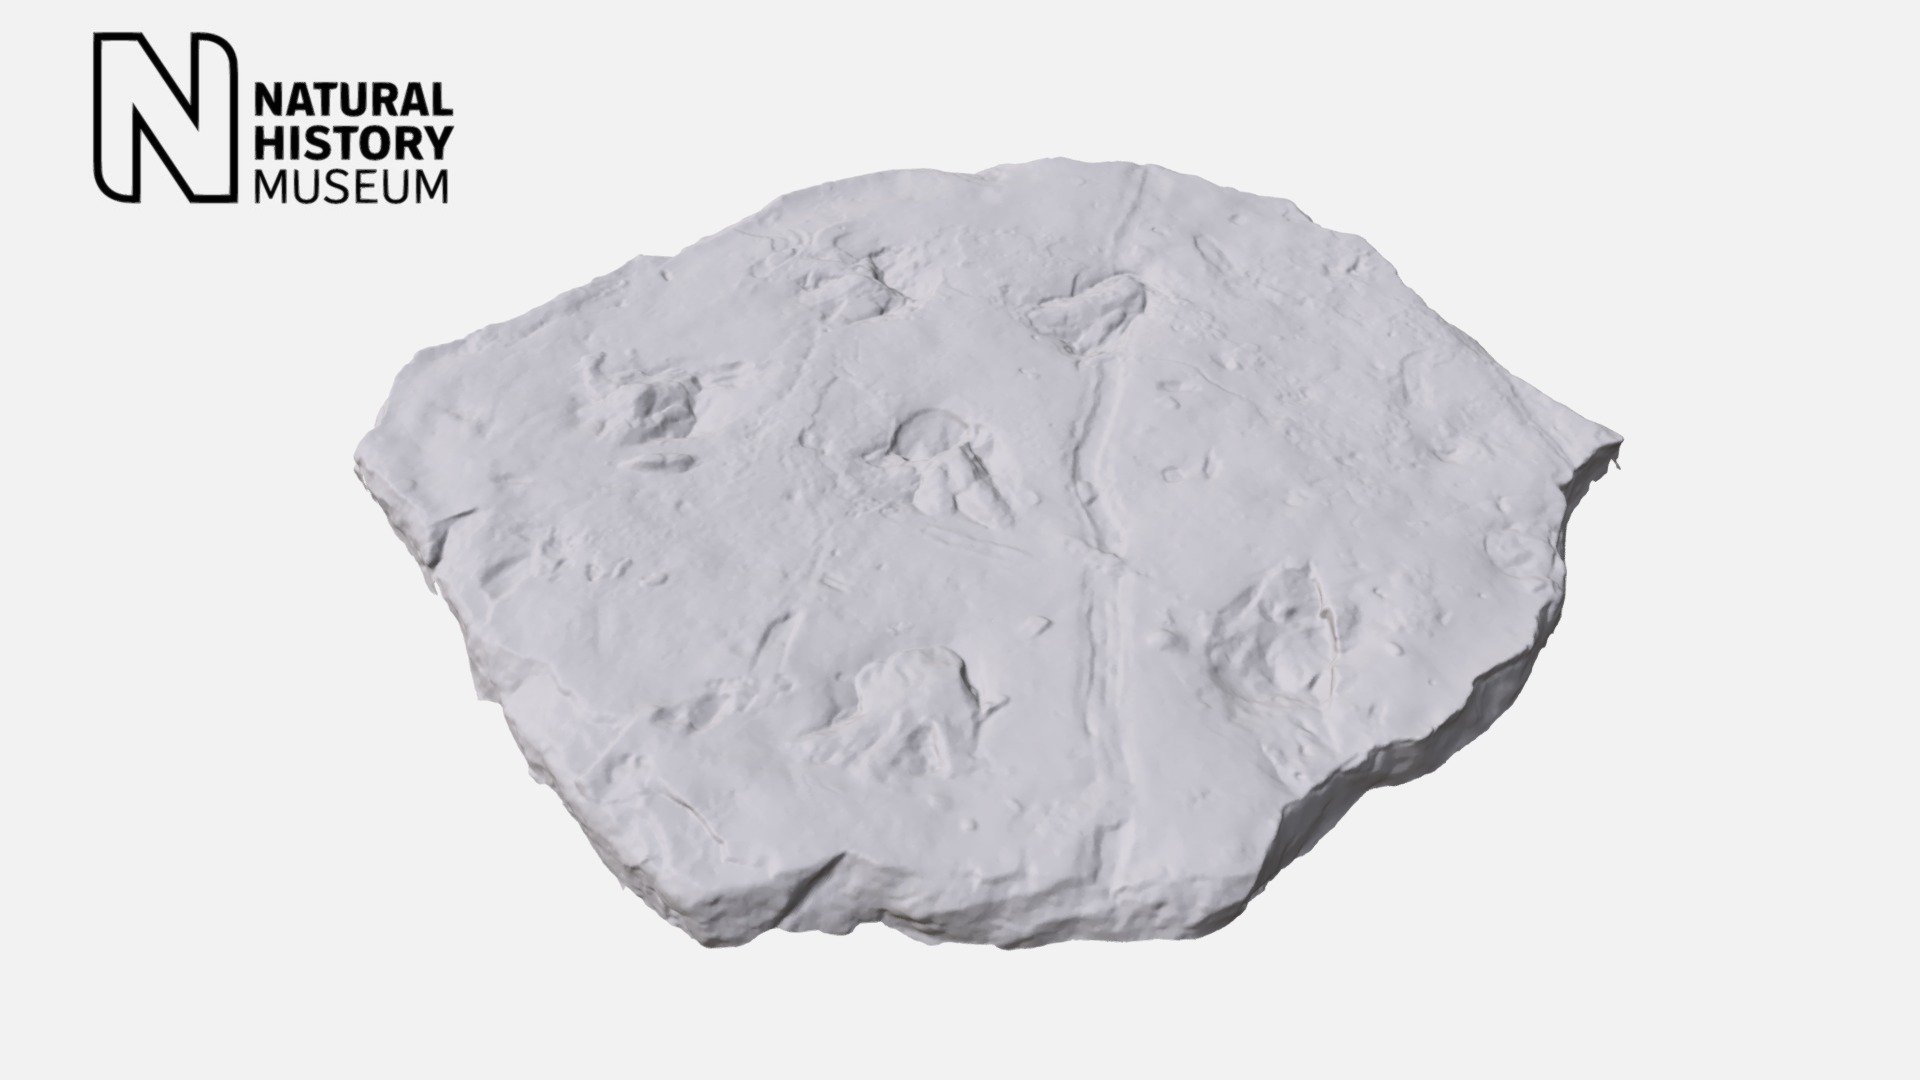 Footprints of an ancient fossil amphibian. The animal was walking across the shore of a lagoon that exisited around 340 million years ago where Yorkshire is today.

PV R 9372 

33cm long, 28cm wide 3d model